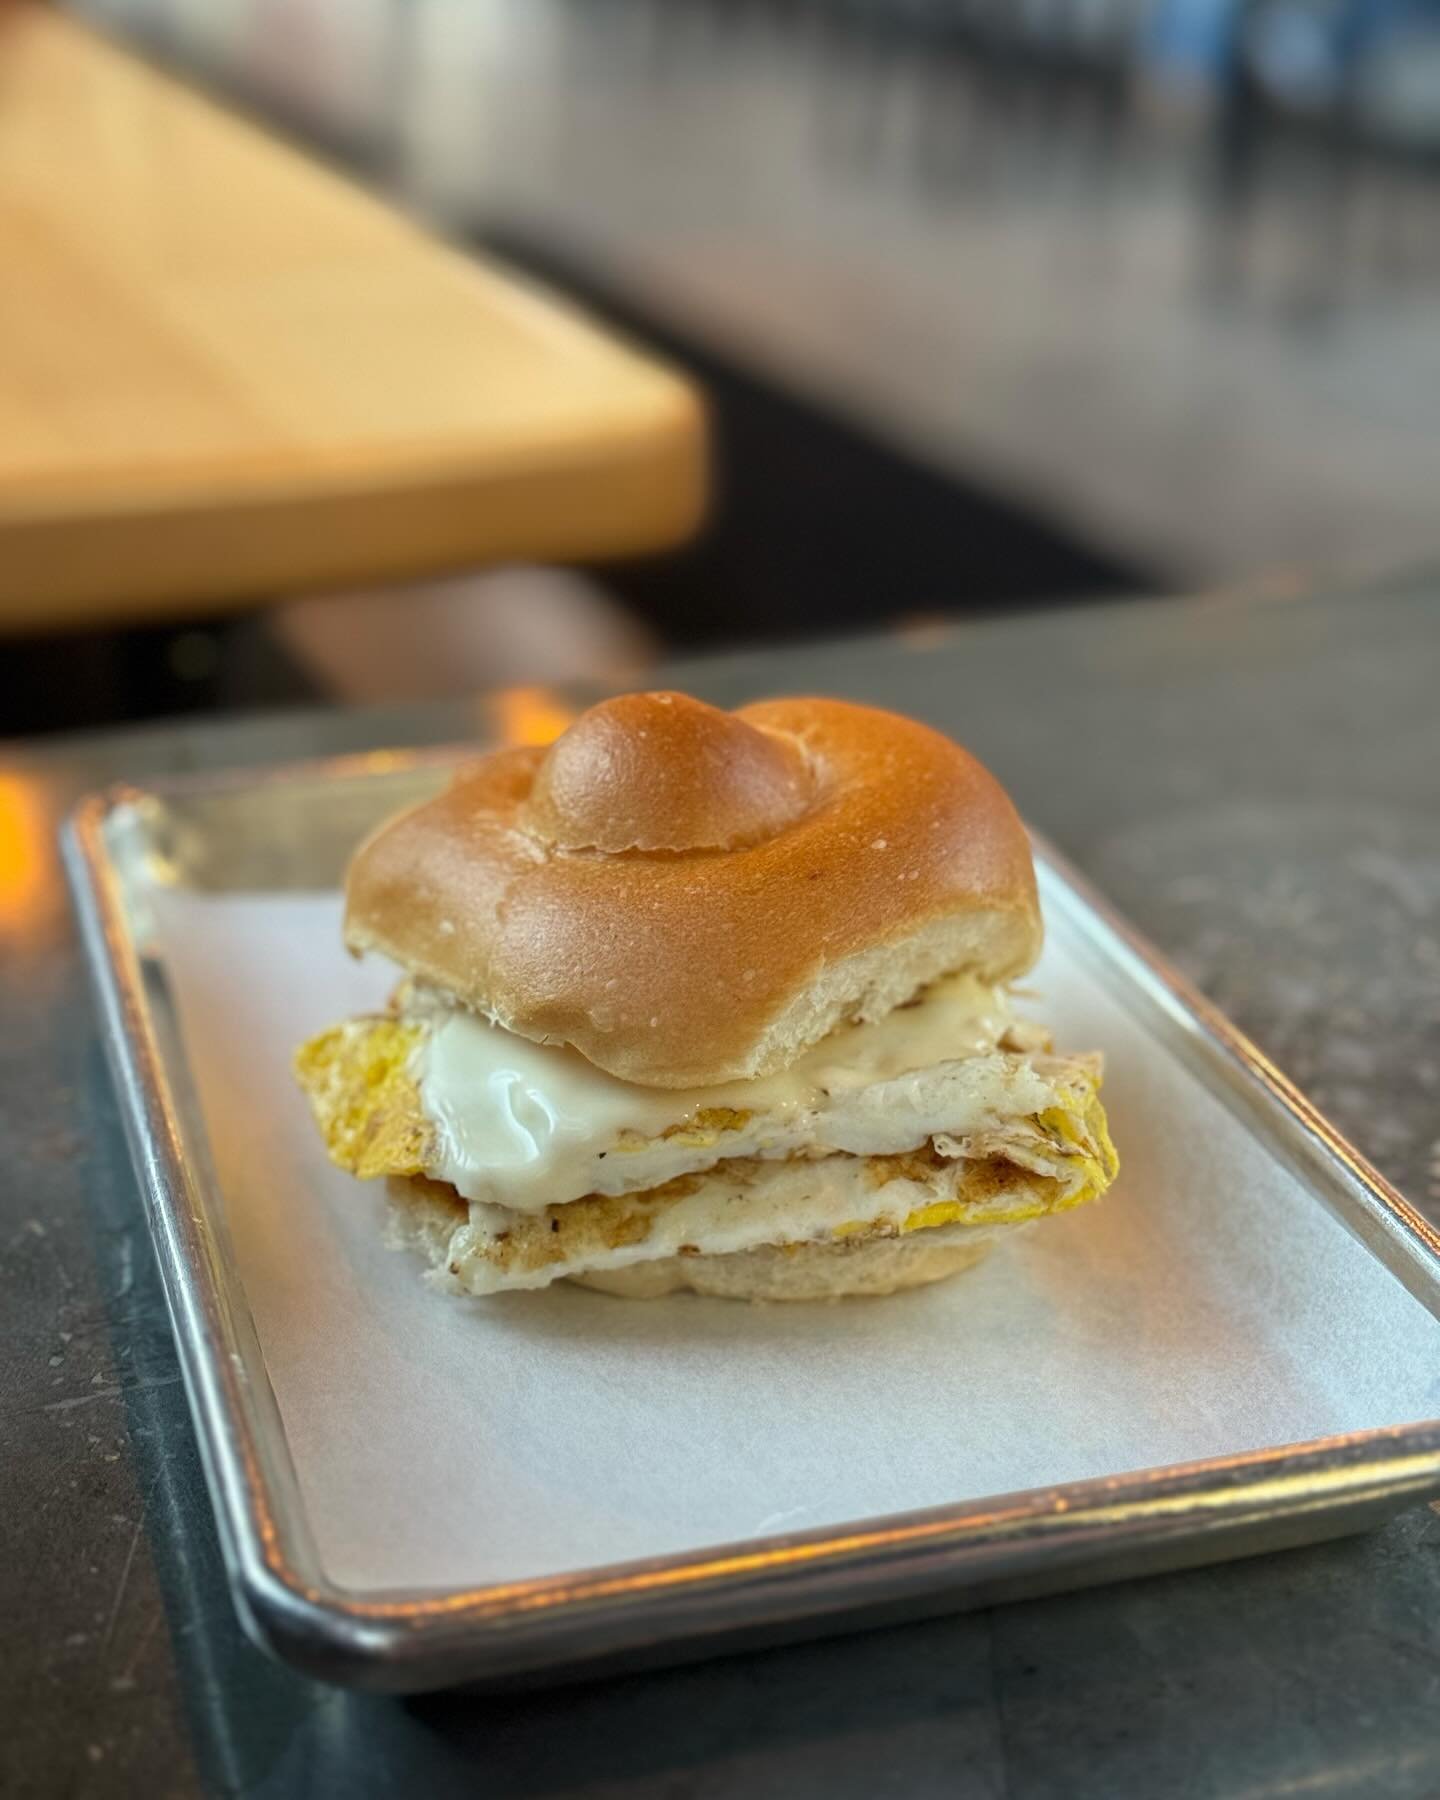 Simple. Delicious. Classic.

The BET 
Two Fried Eggs, American Cheese, DiPaolo&rsquo;s Bun

🍳 ☕️